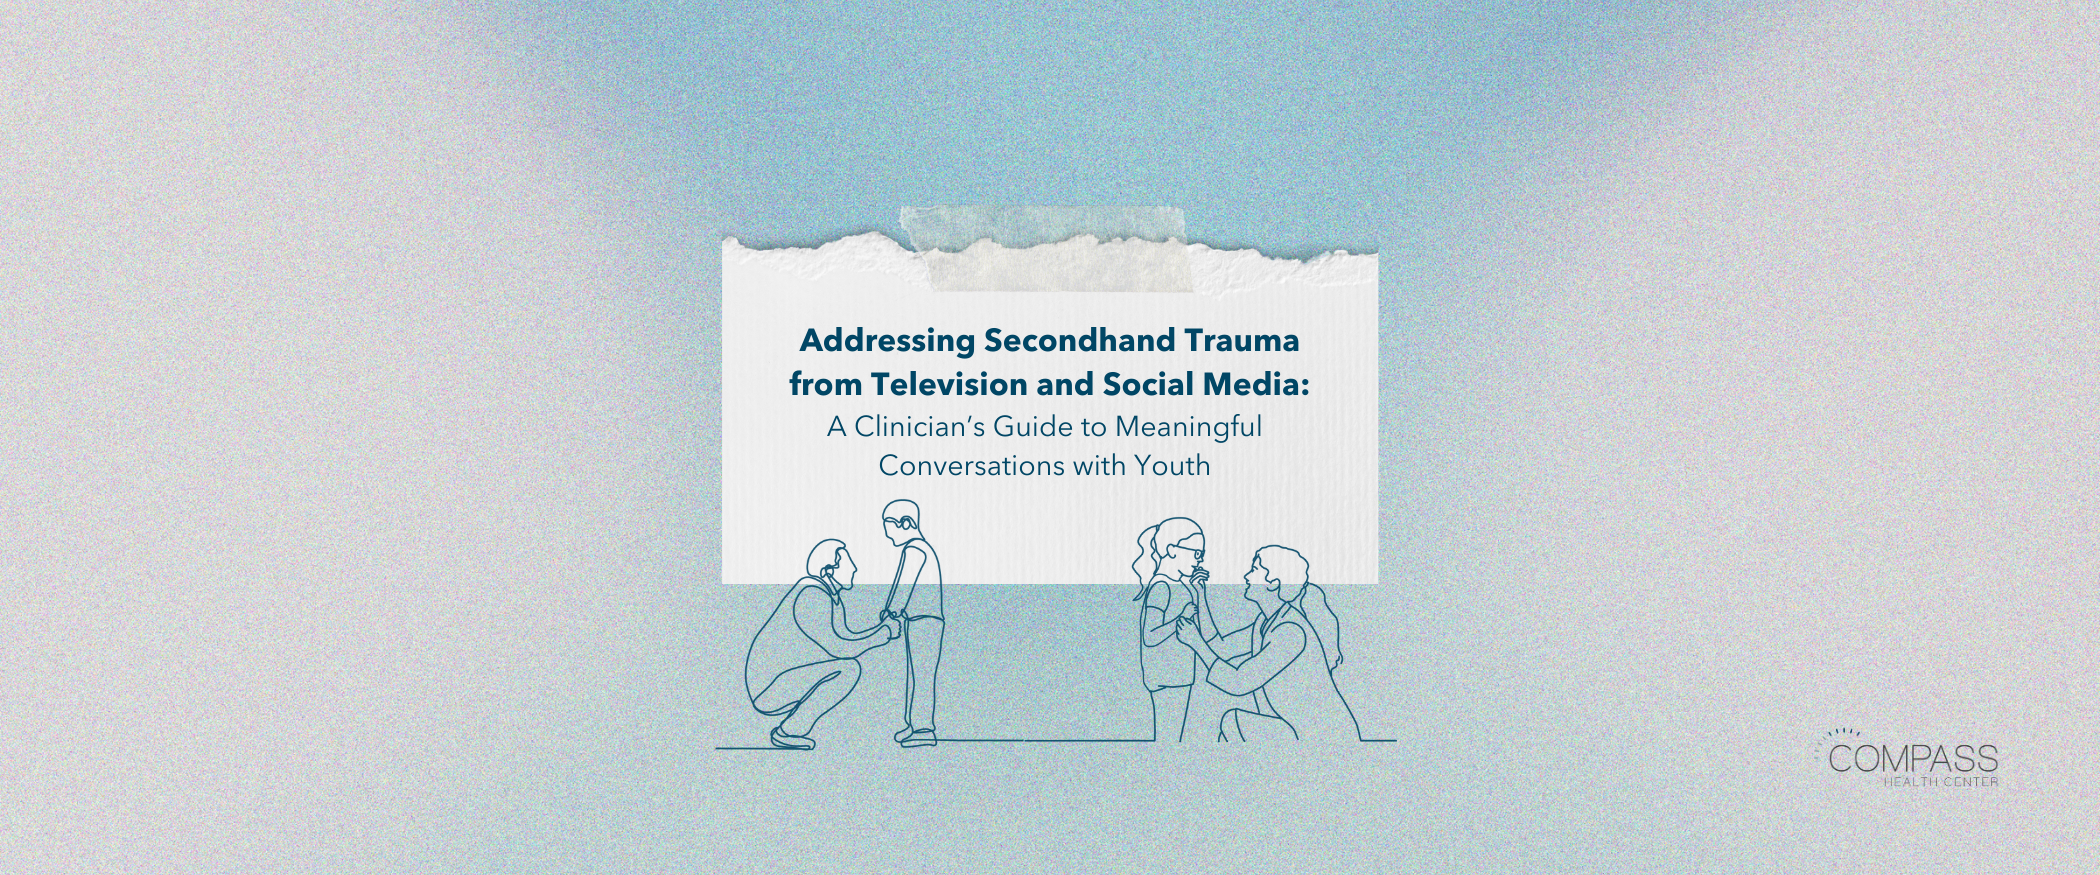 Addressing Secondhand Trauma from Television and Social Media: A Clinician’s Guide to Meaningful Conversations with Youth